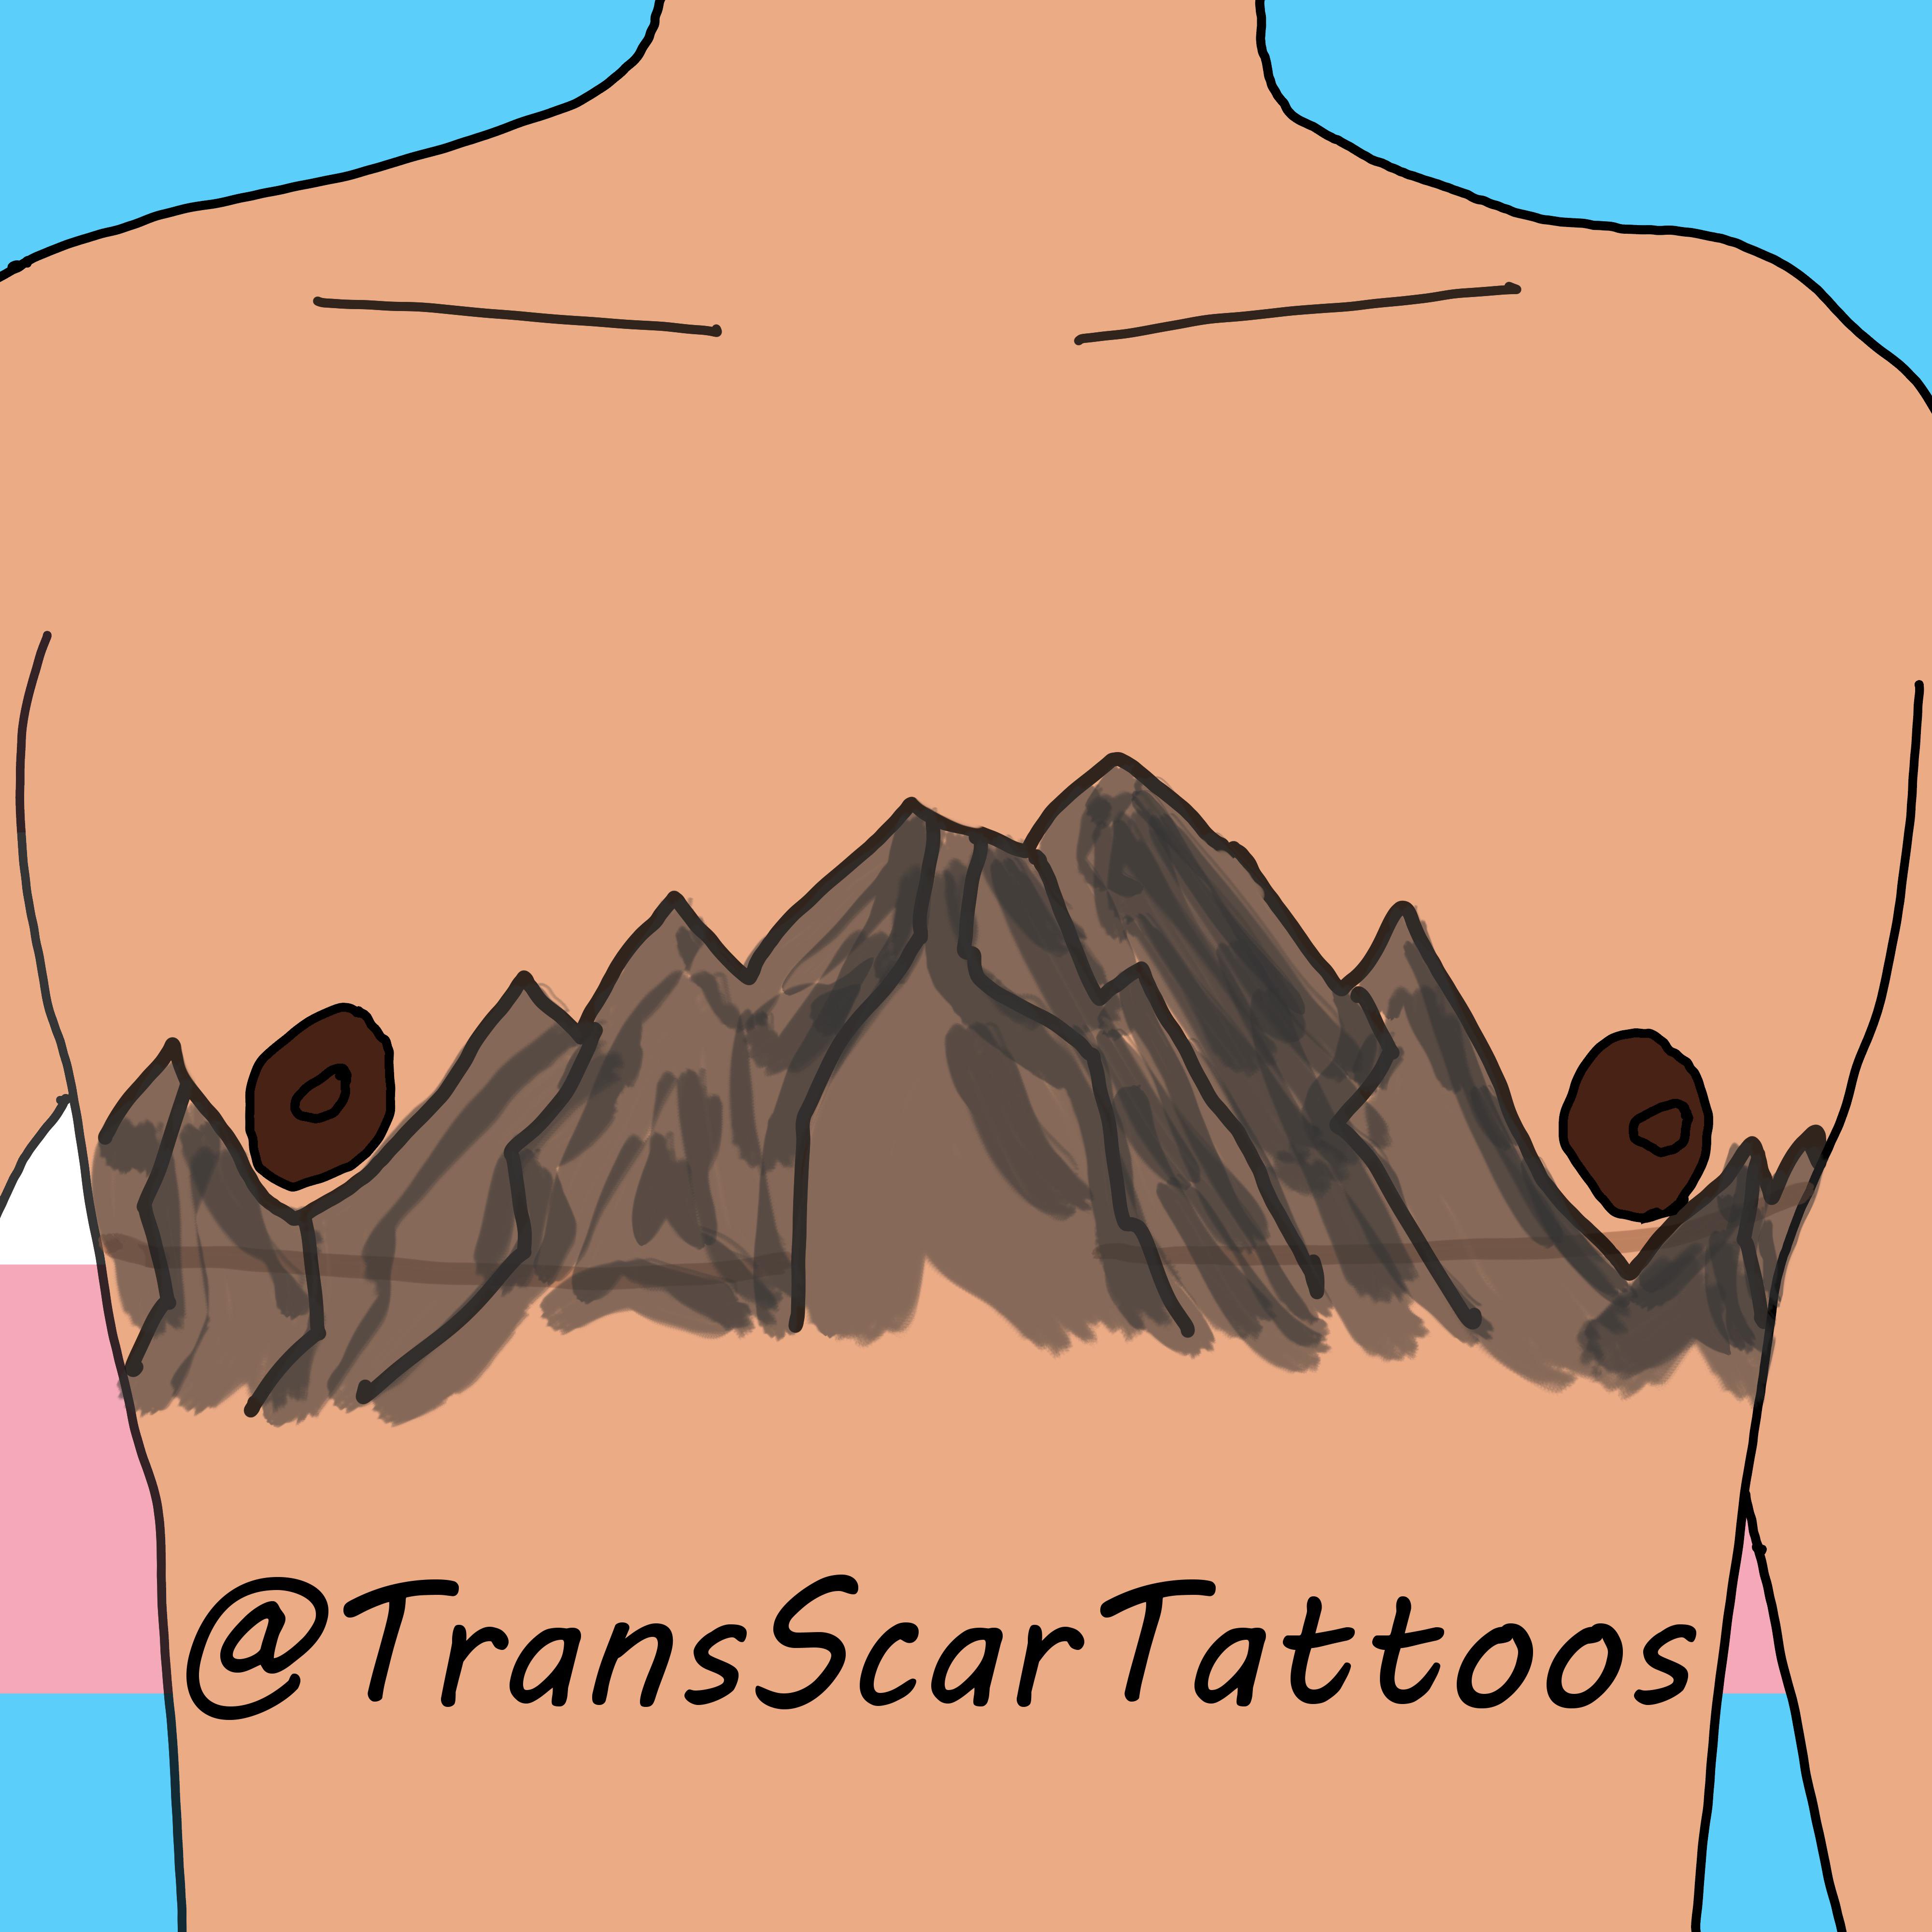 Scar Reduction FTM Top Surgery Bilateral Mastectomy Breast Removal 2   Stretch Mark Treatment Scars Dry Tattooing Permanent Makeup Saline  Tattoo Removal in Manchester